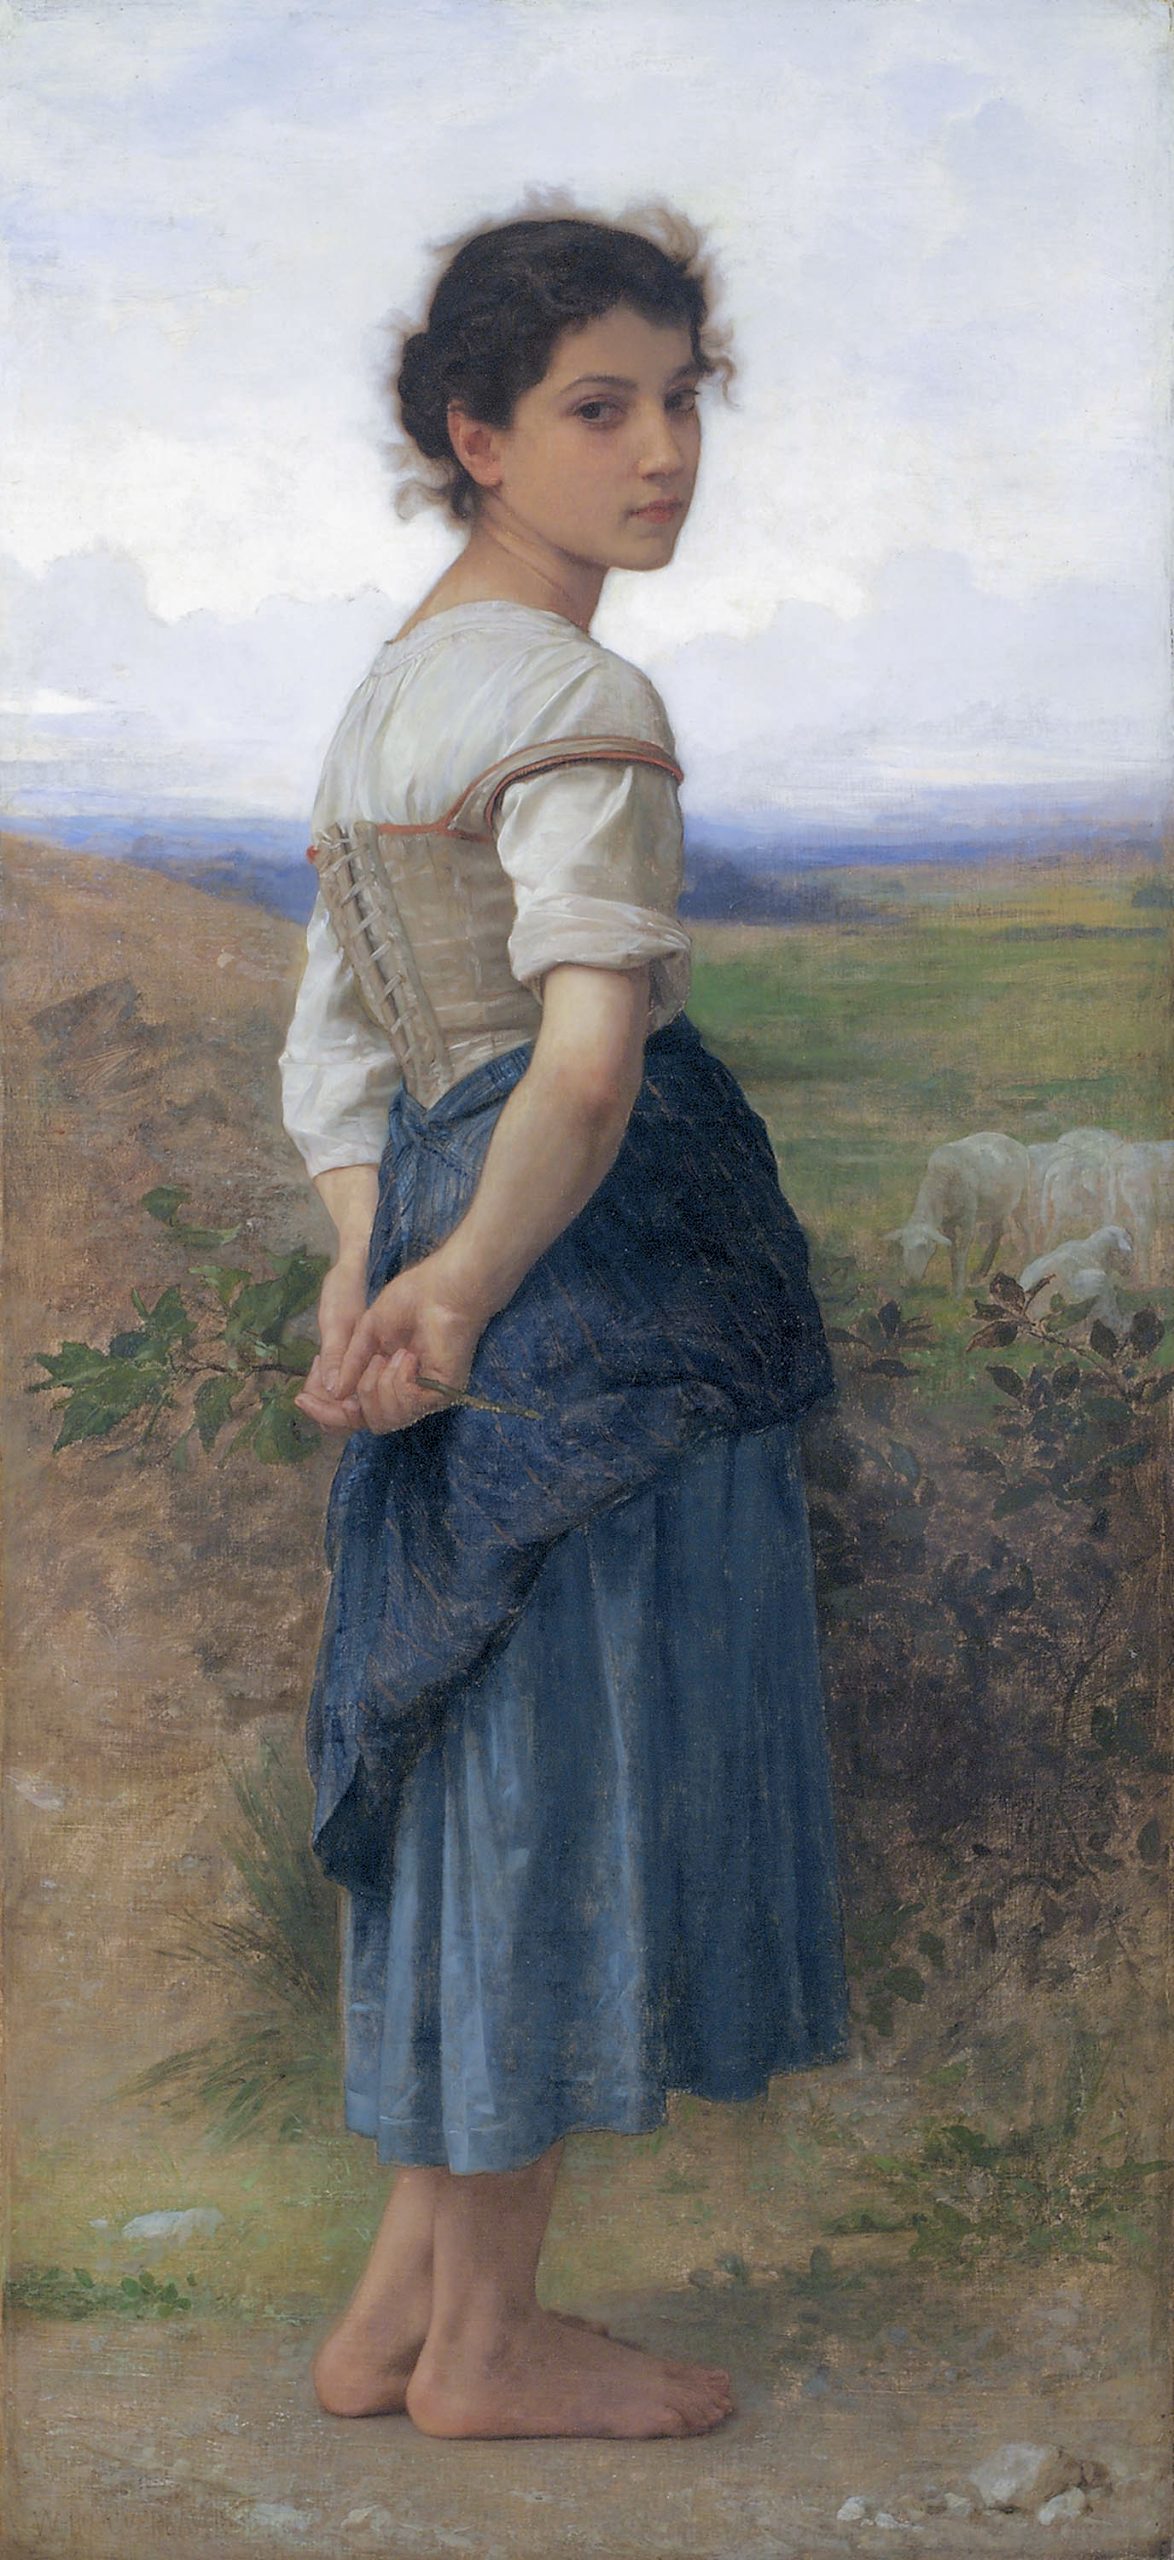 The Young Shepherdess by The Young Shepherdess - William-Adolphe Bougereau, painted in 1855.